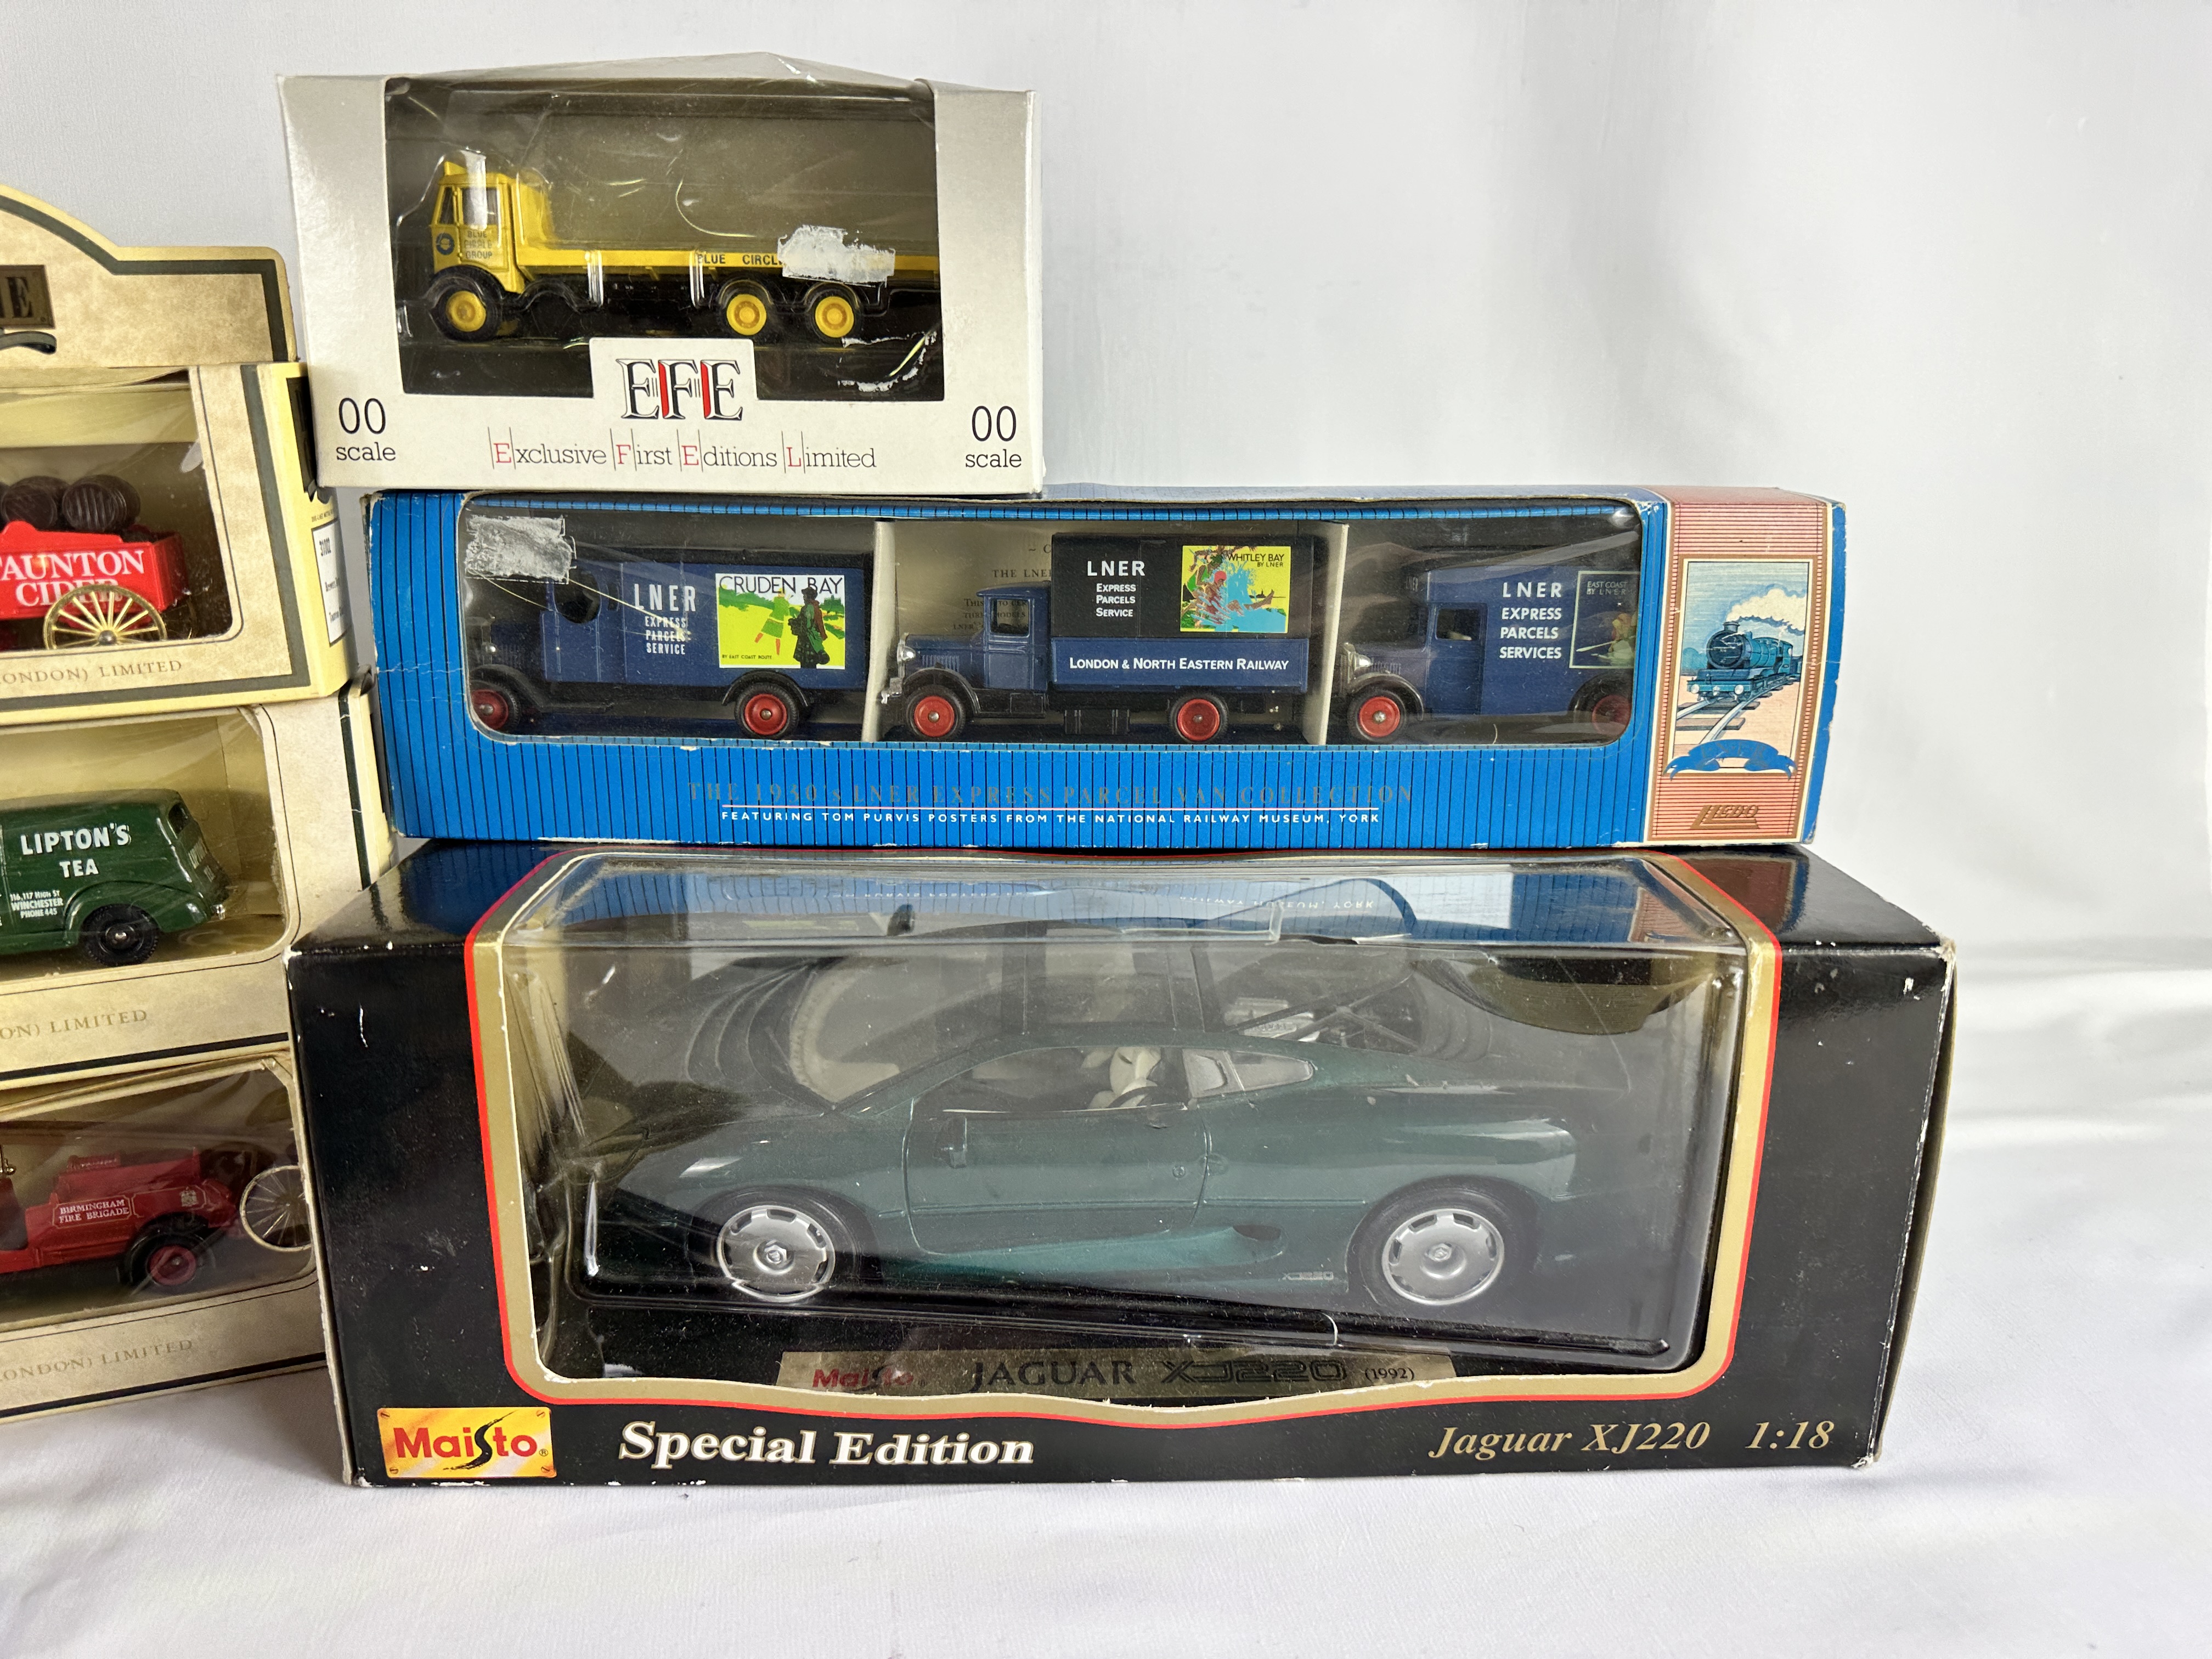 Corgi F1 model car, together with other model vehicles - Image 3 of 9